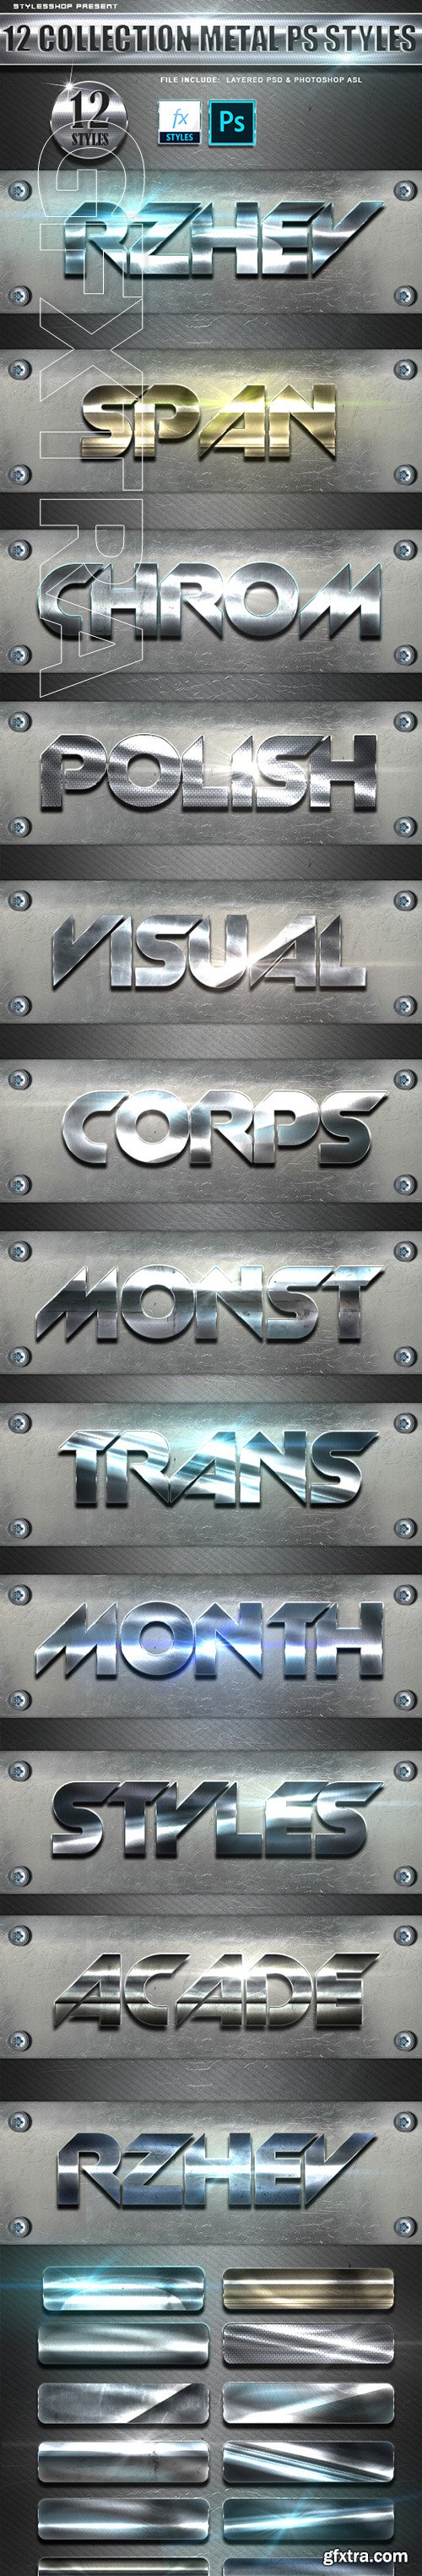 GraphicRiver - 12 Collection Metal Photoshop Text Styles Vol 3 24783635